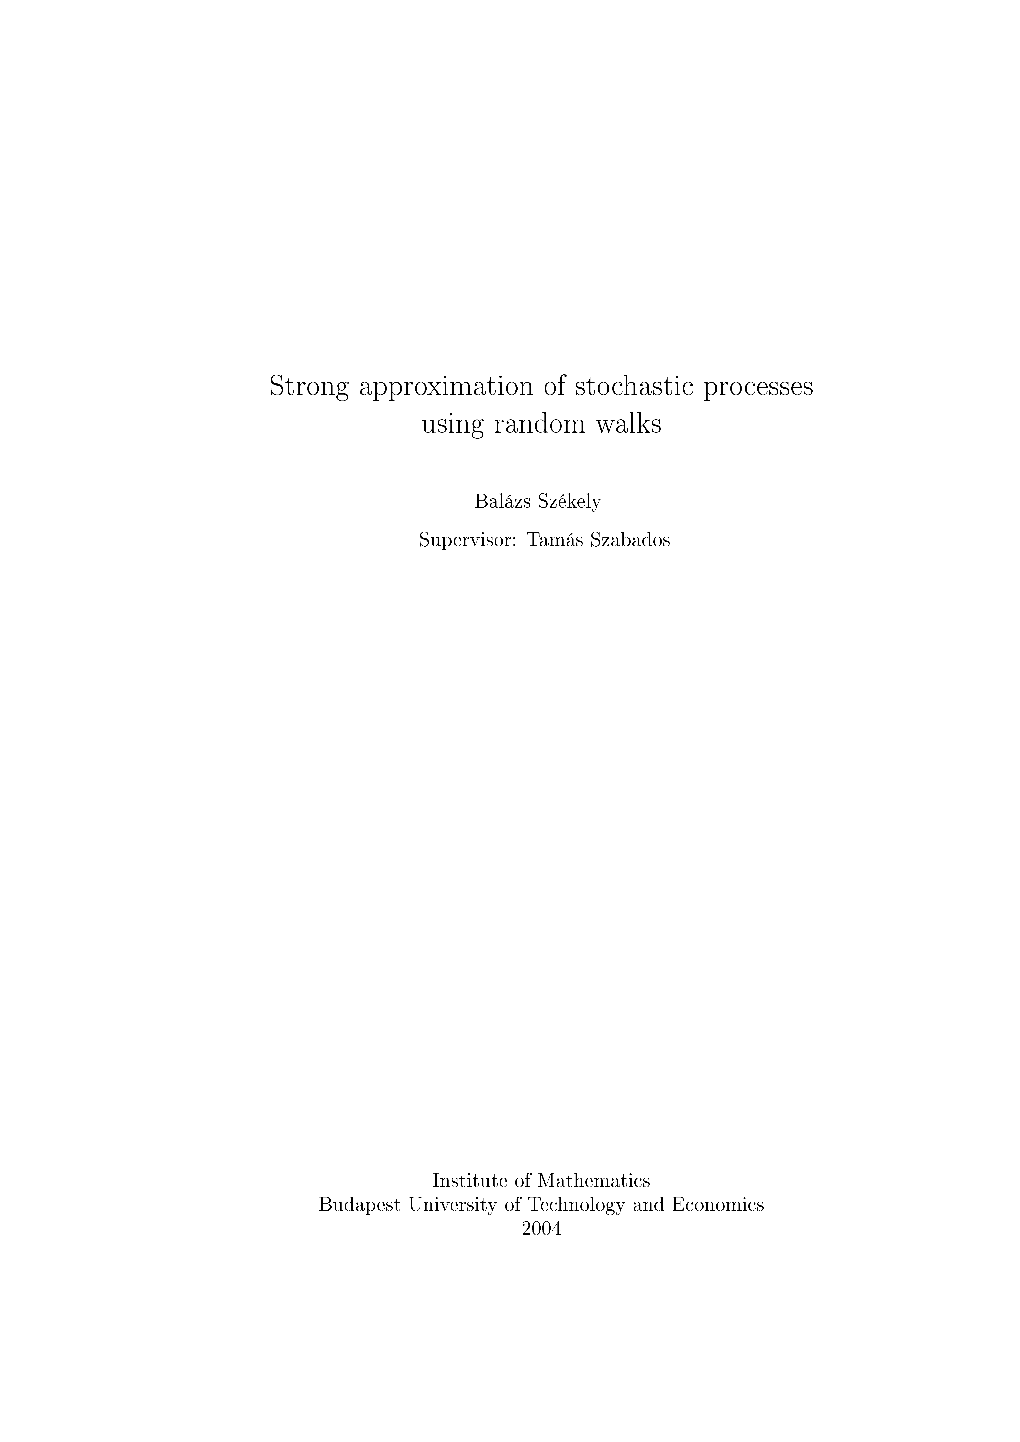 Strong Approximation of Stochastic Processes Using Random Walks